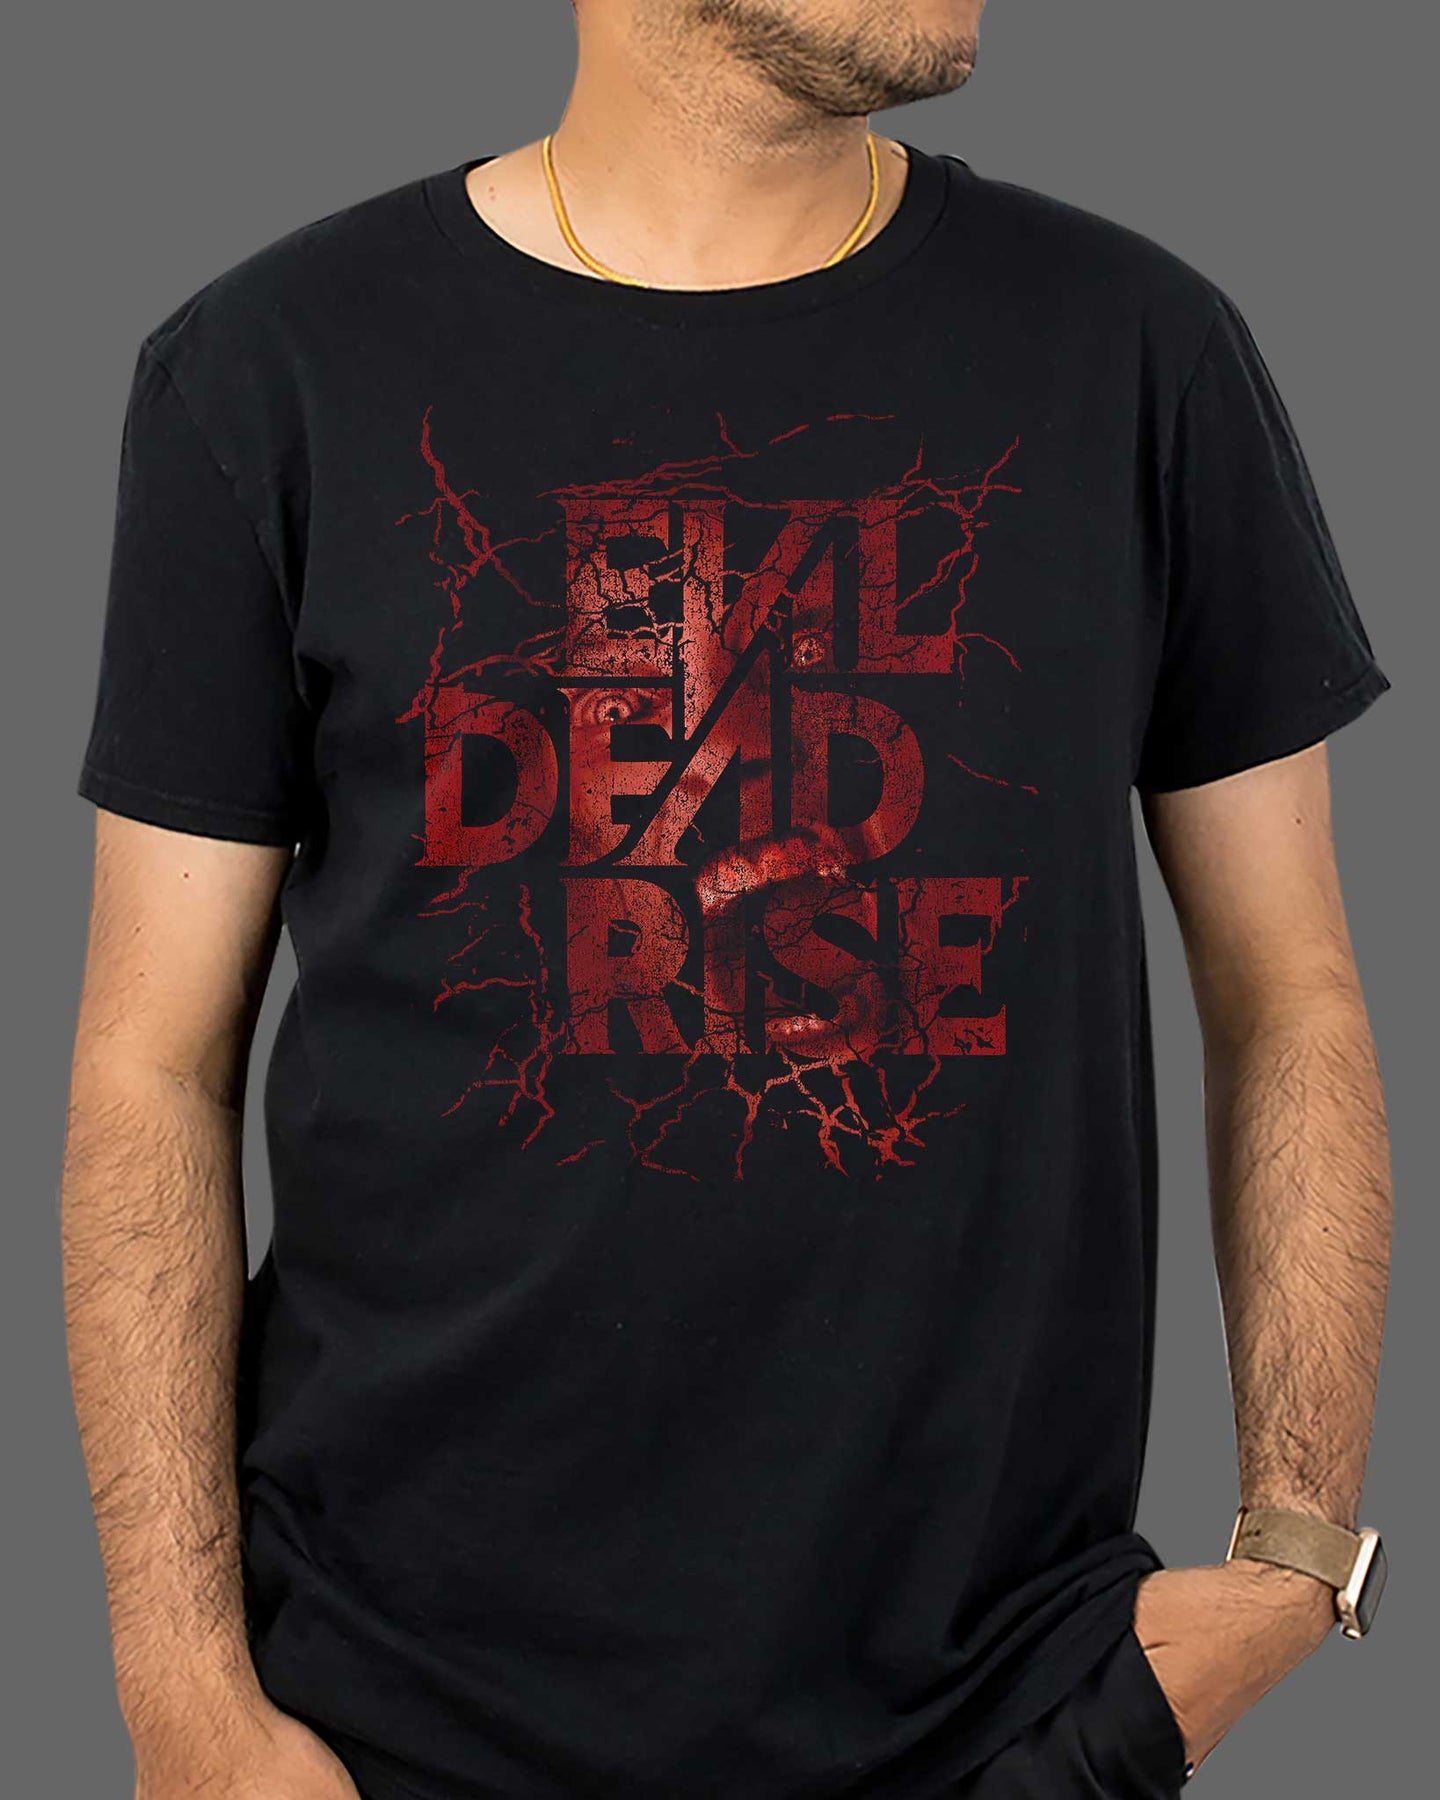 Evil Dead Rise (2023) - Officially Licensed T-Shirts for the New